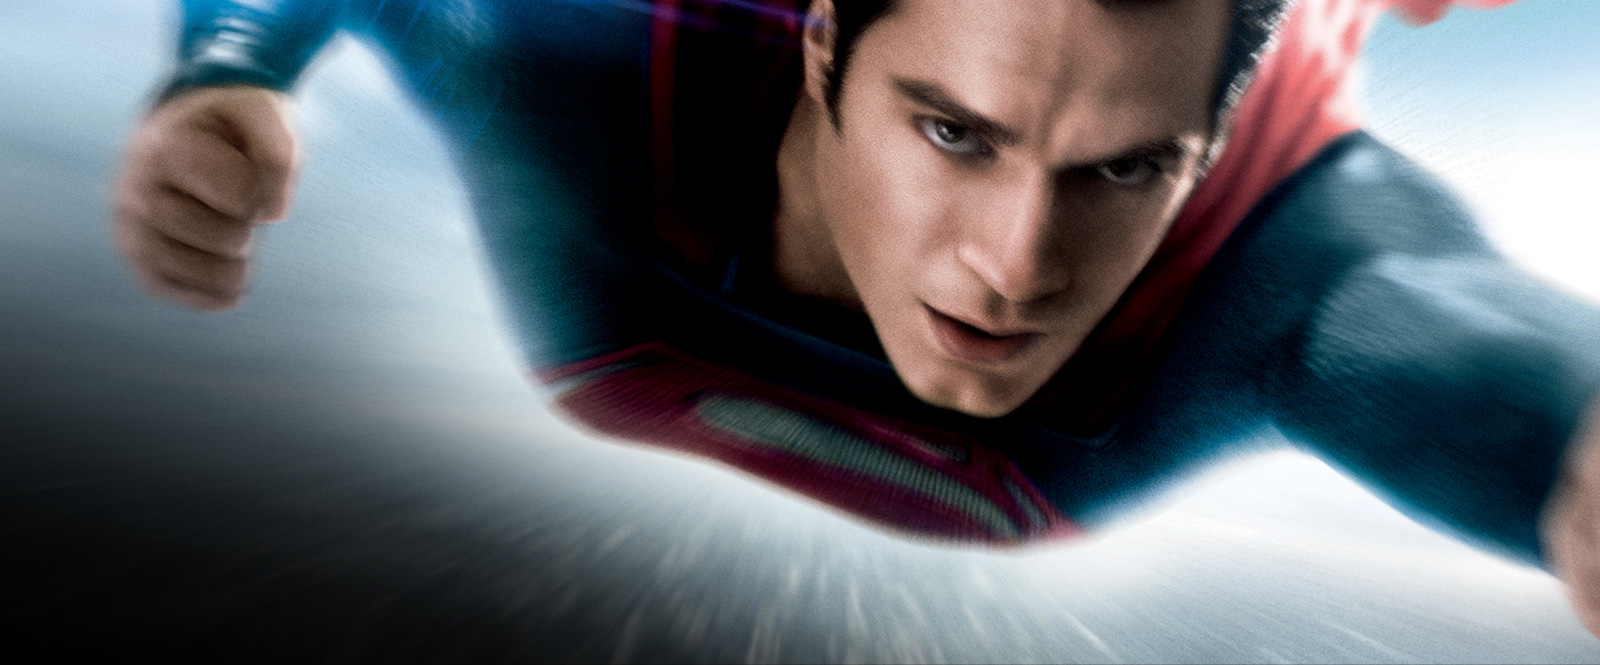 Man of Steel Re-Review by David Isaac